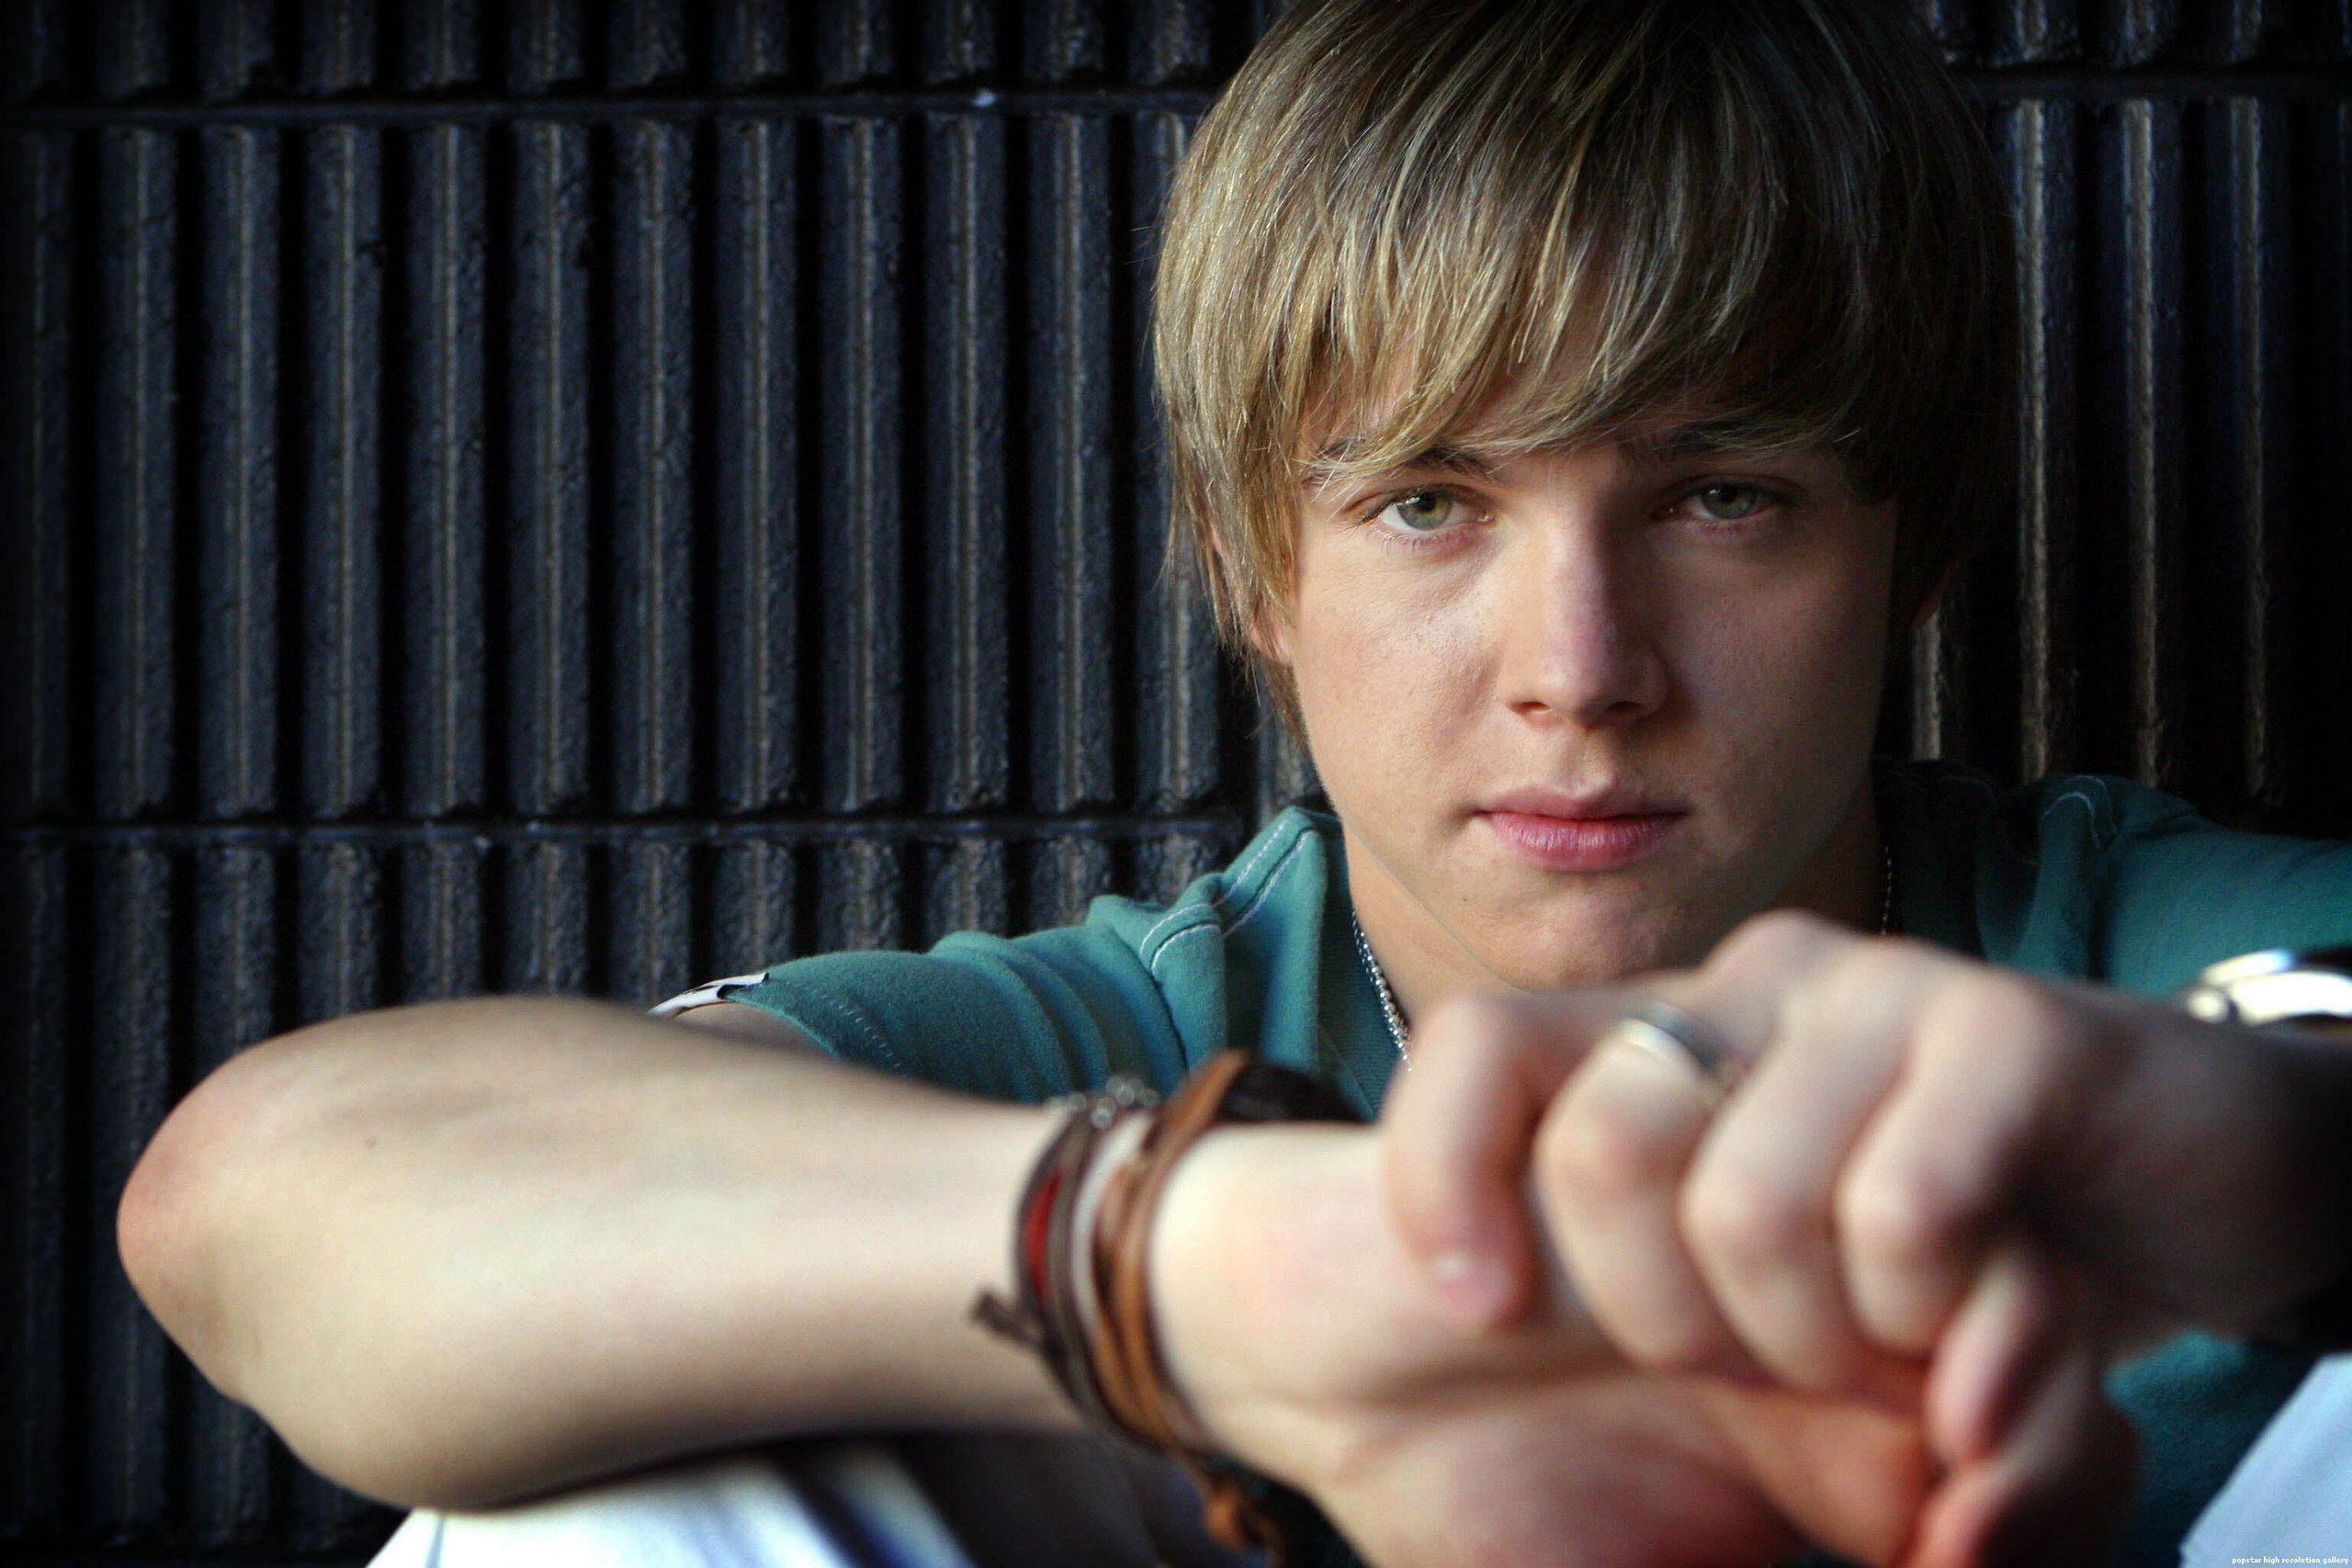 Jesse Jesse Mccartney 18383390 2560 1707 HD Wallpaper and Picture